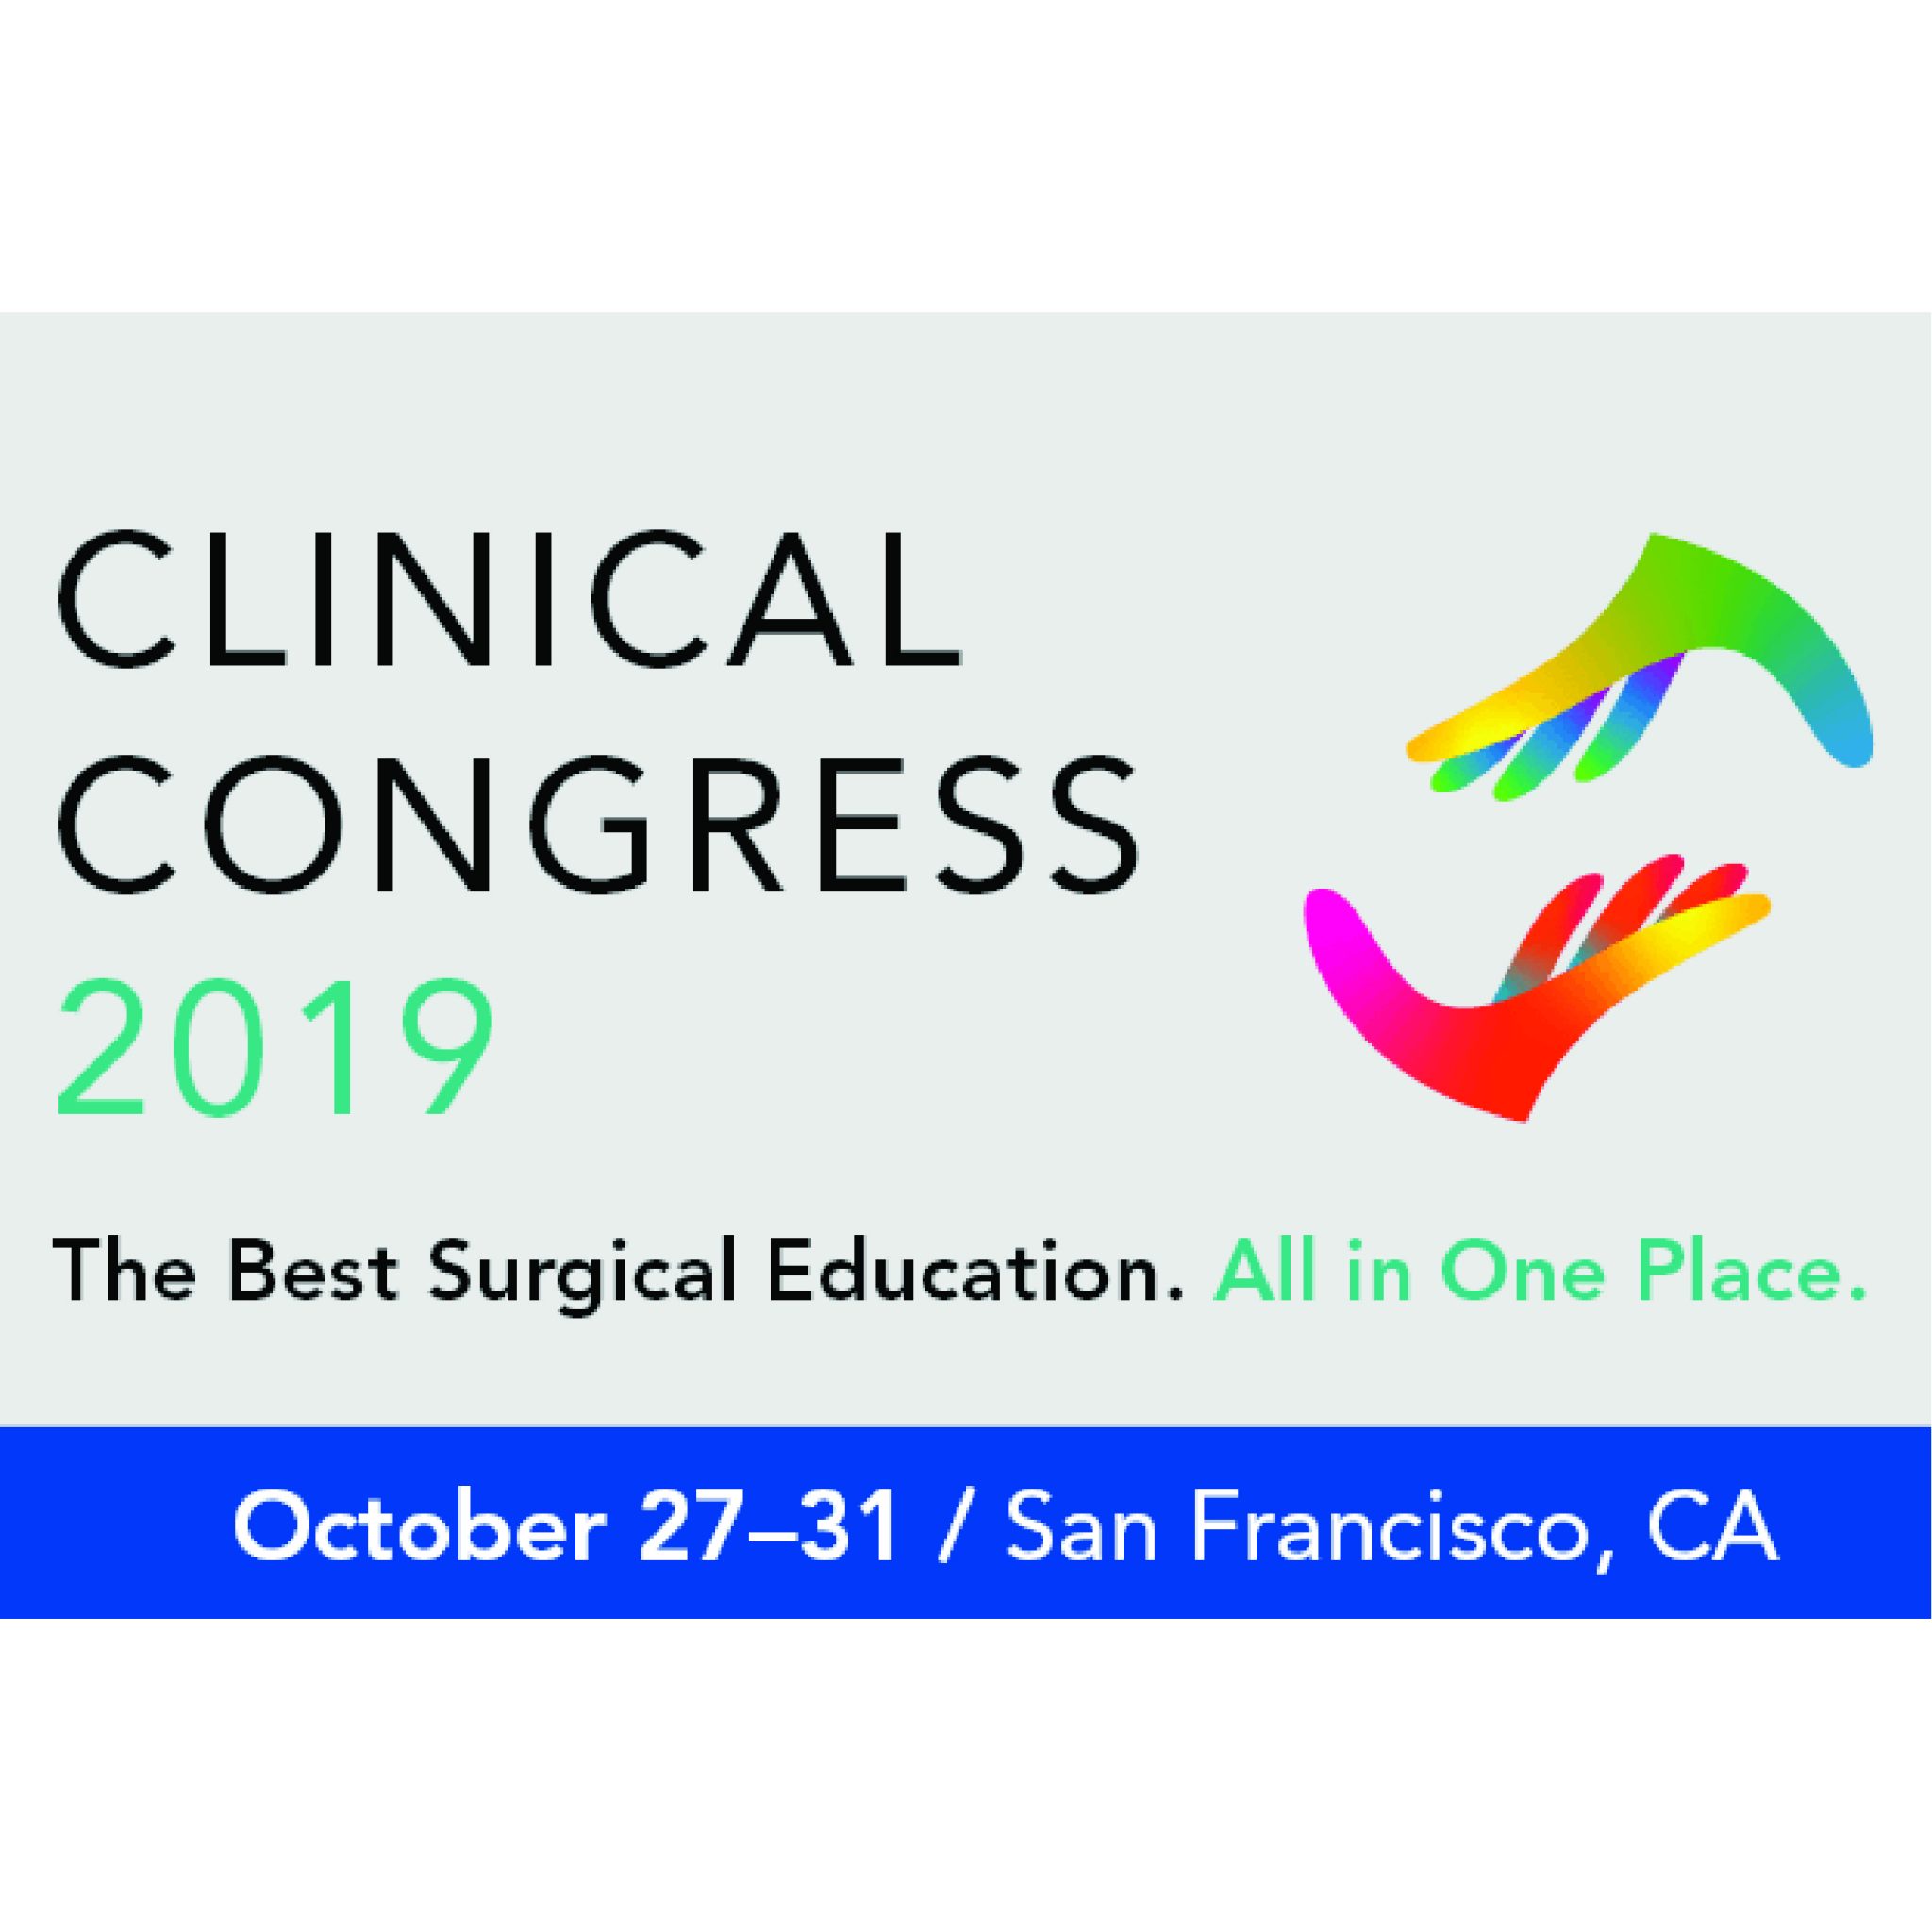 Clinical Congress 2019 American College of Surgeons (ACS) 3Dmed